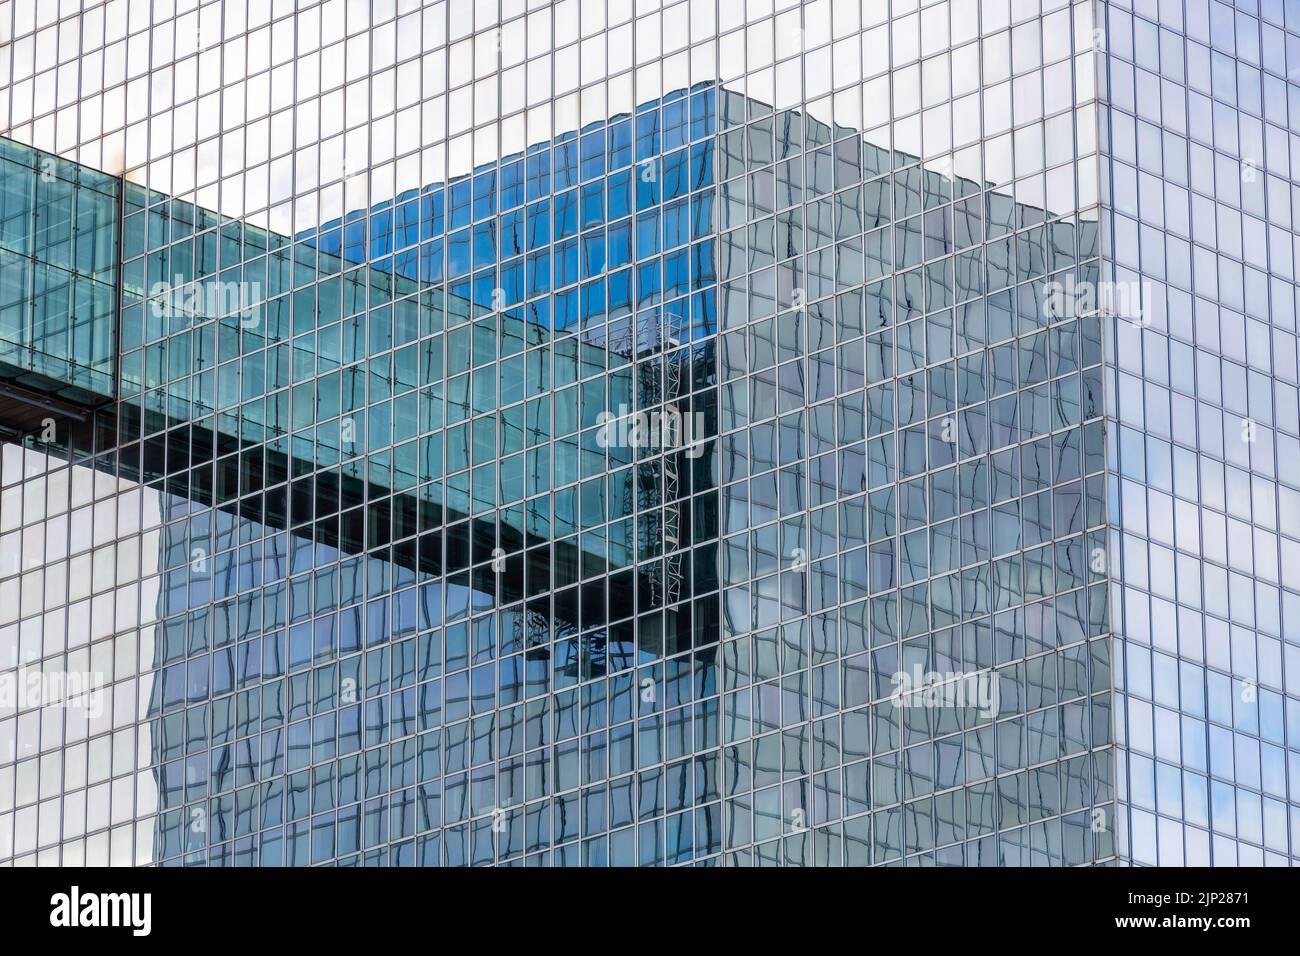 Reciprocal reflected images of two glass towers connected by a walkway. Stock Photo